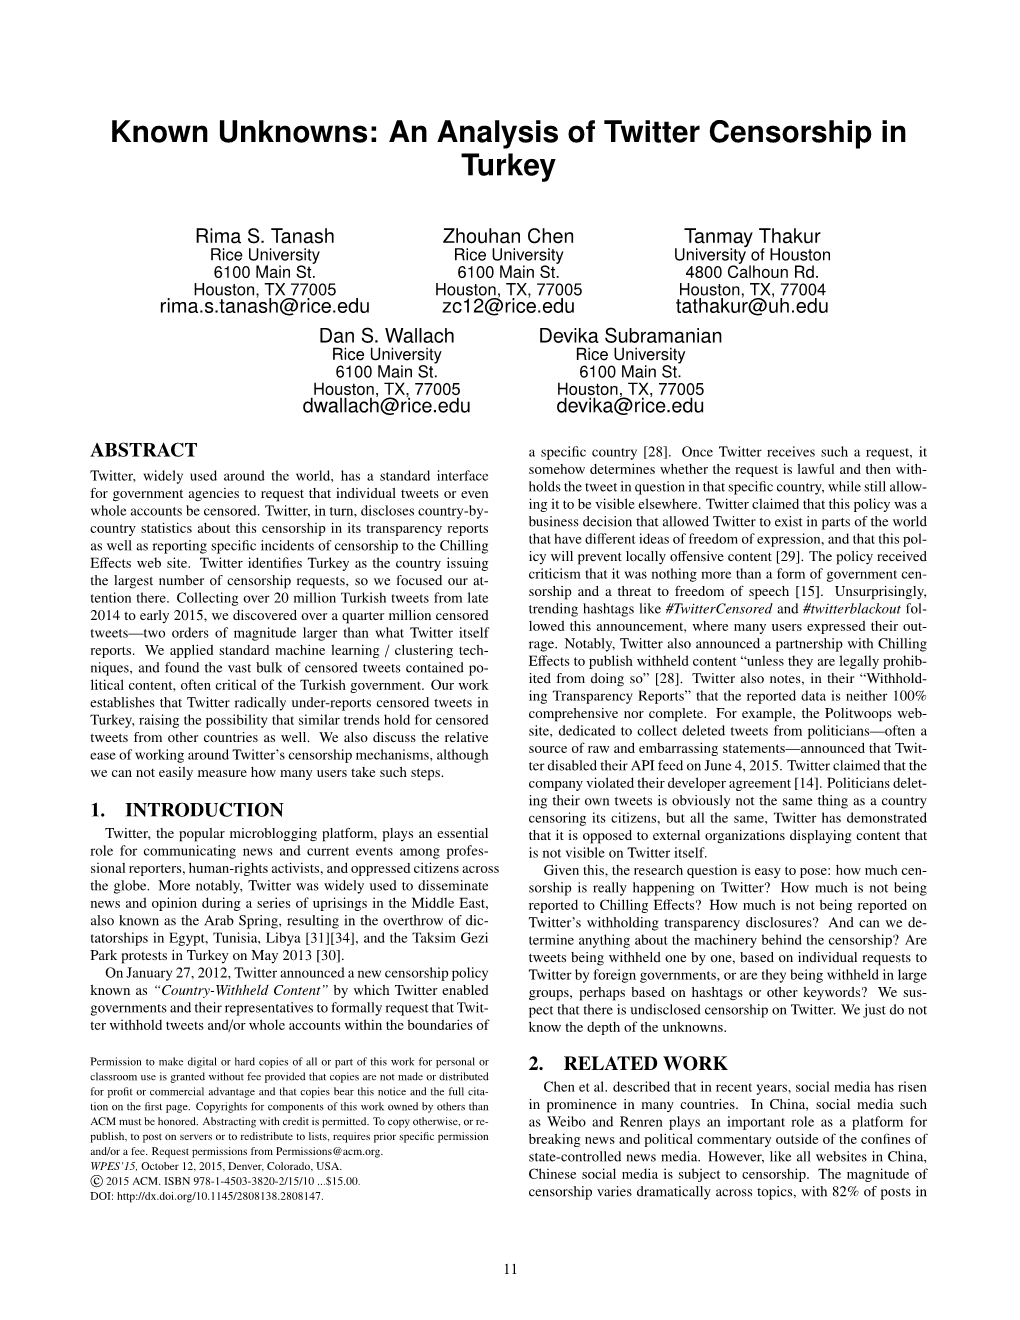 Known Unknowns: an Analysis of Twitter Censorship in Turkey